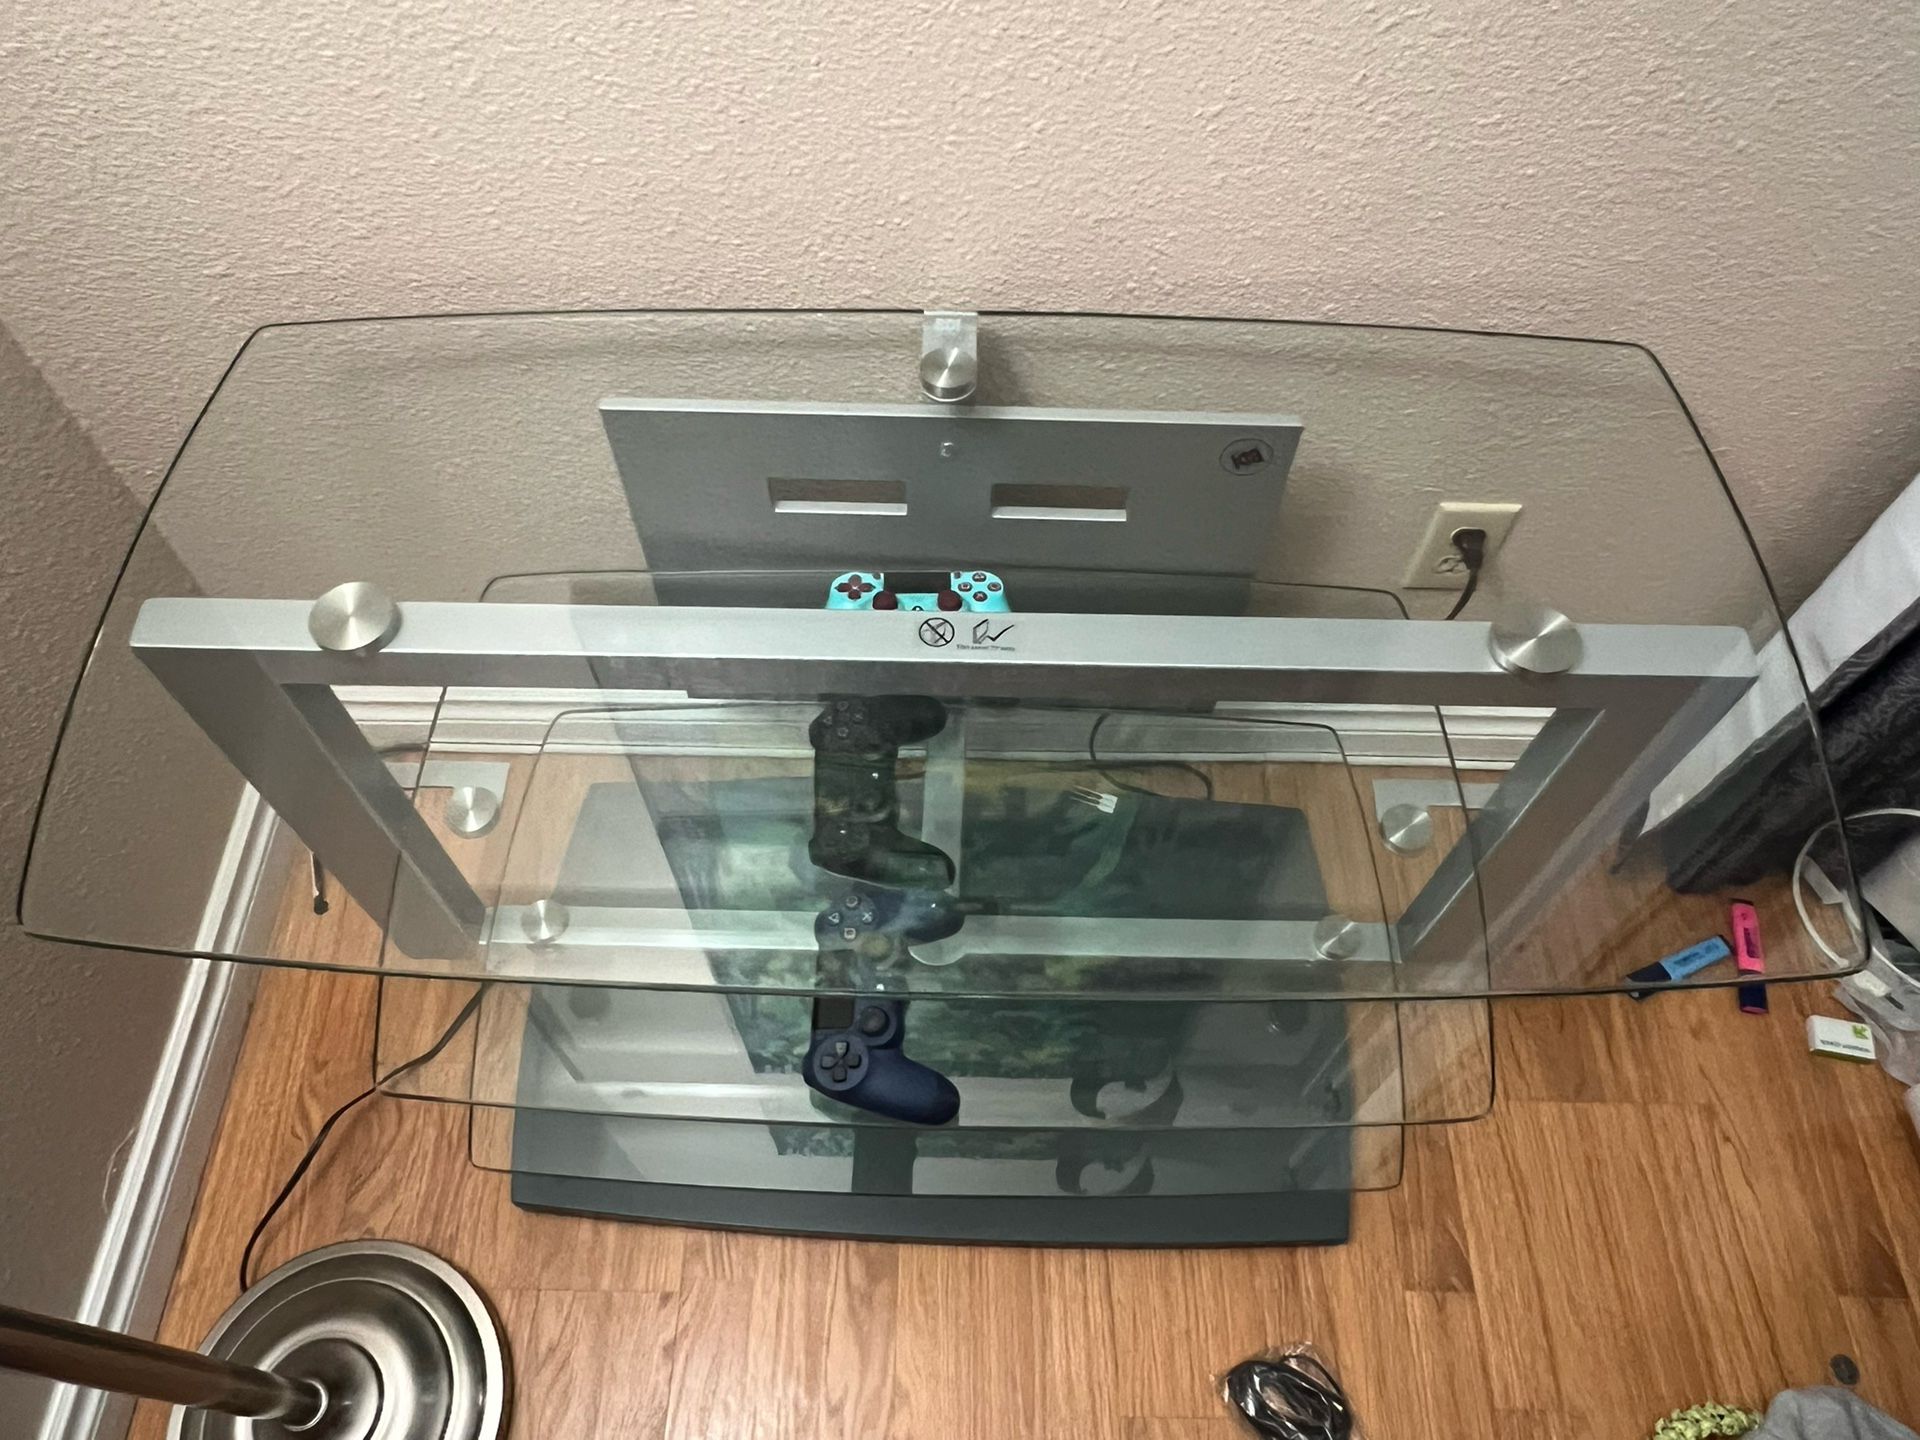 Large Glass Entertainment Stand 